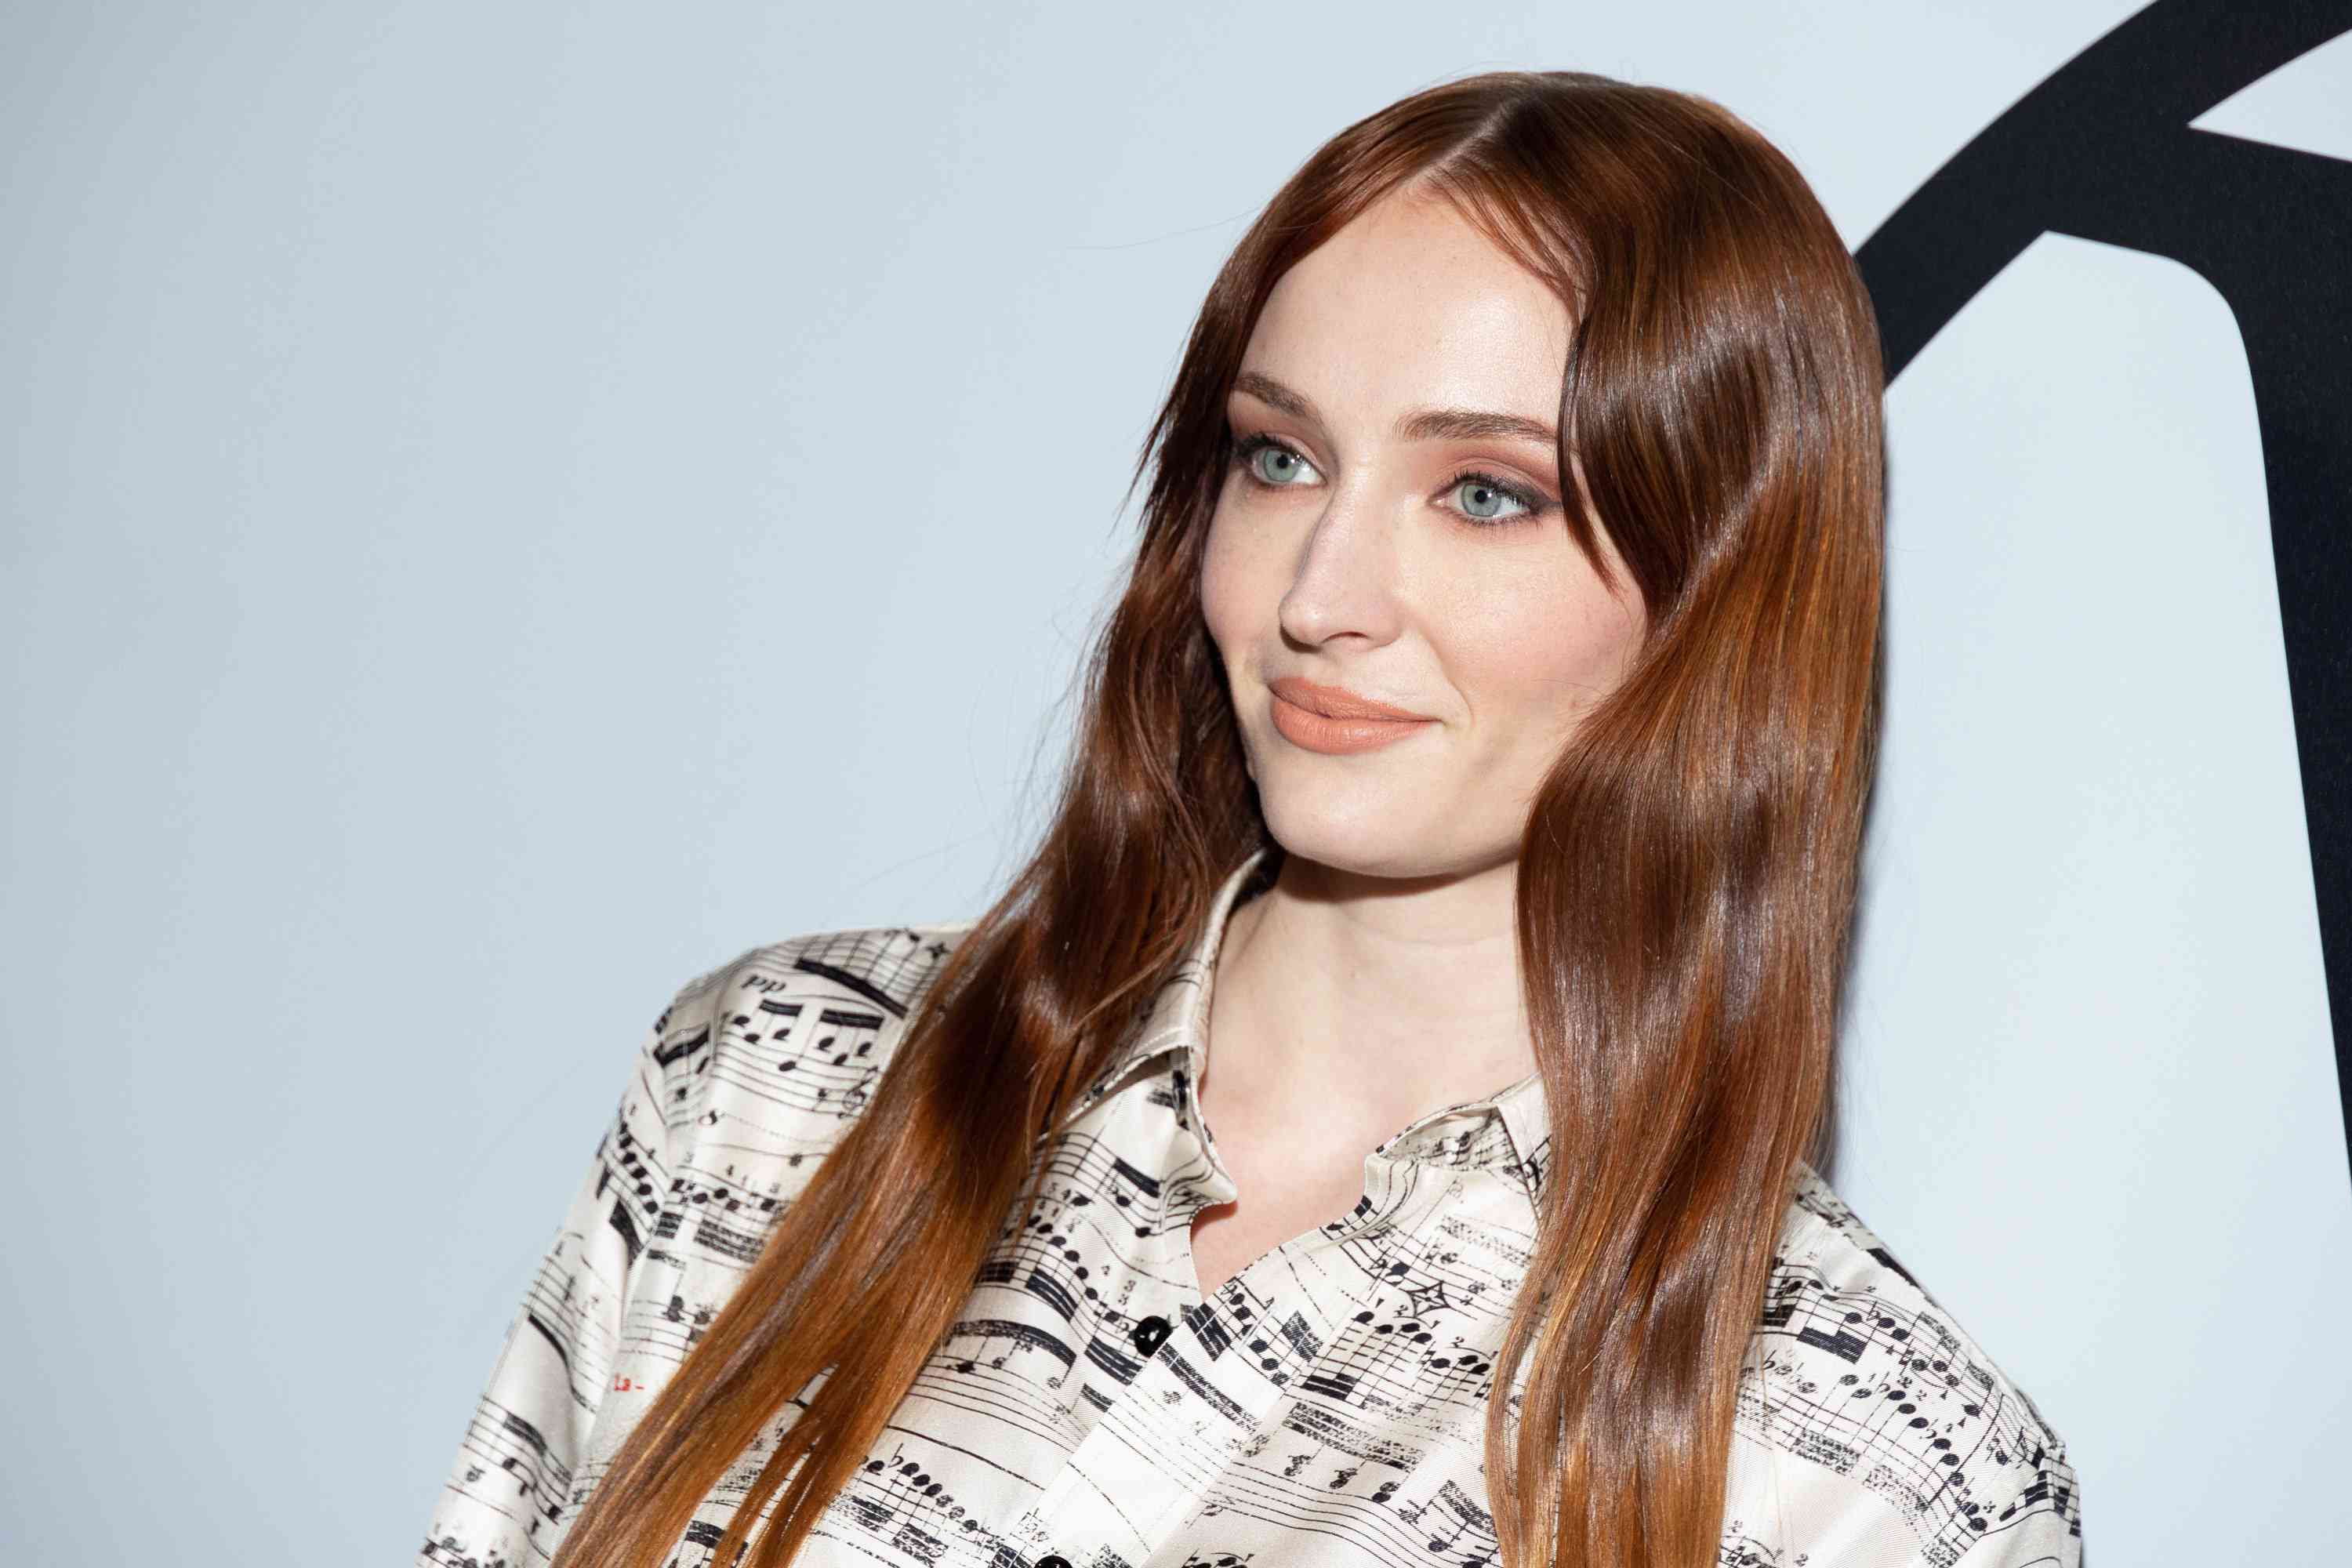 Sophie Turner Dishes on Her ‘Palate of a 2-Year-Old’ and Which Food Brings Back ‘2 A.M. Memories’